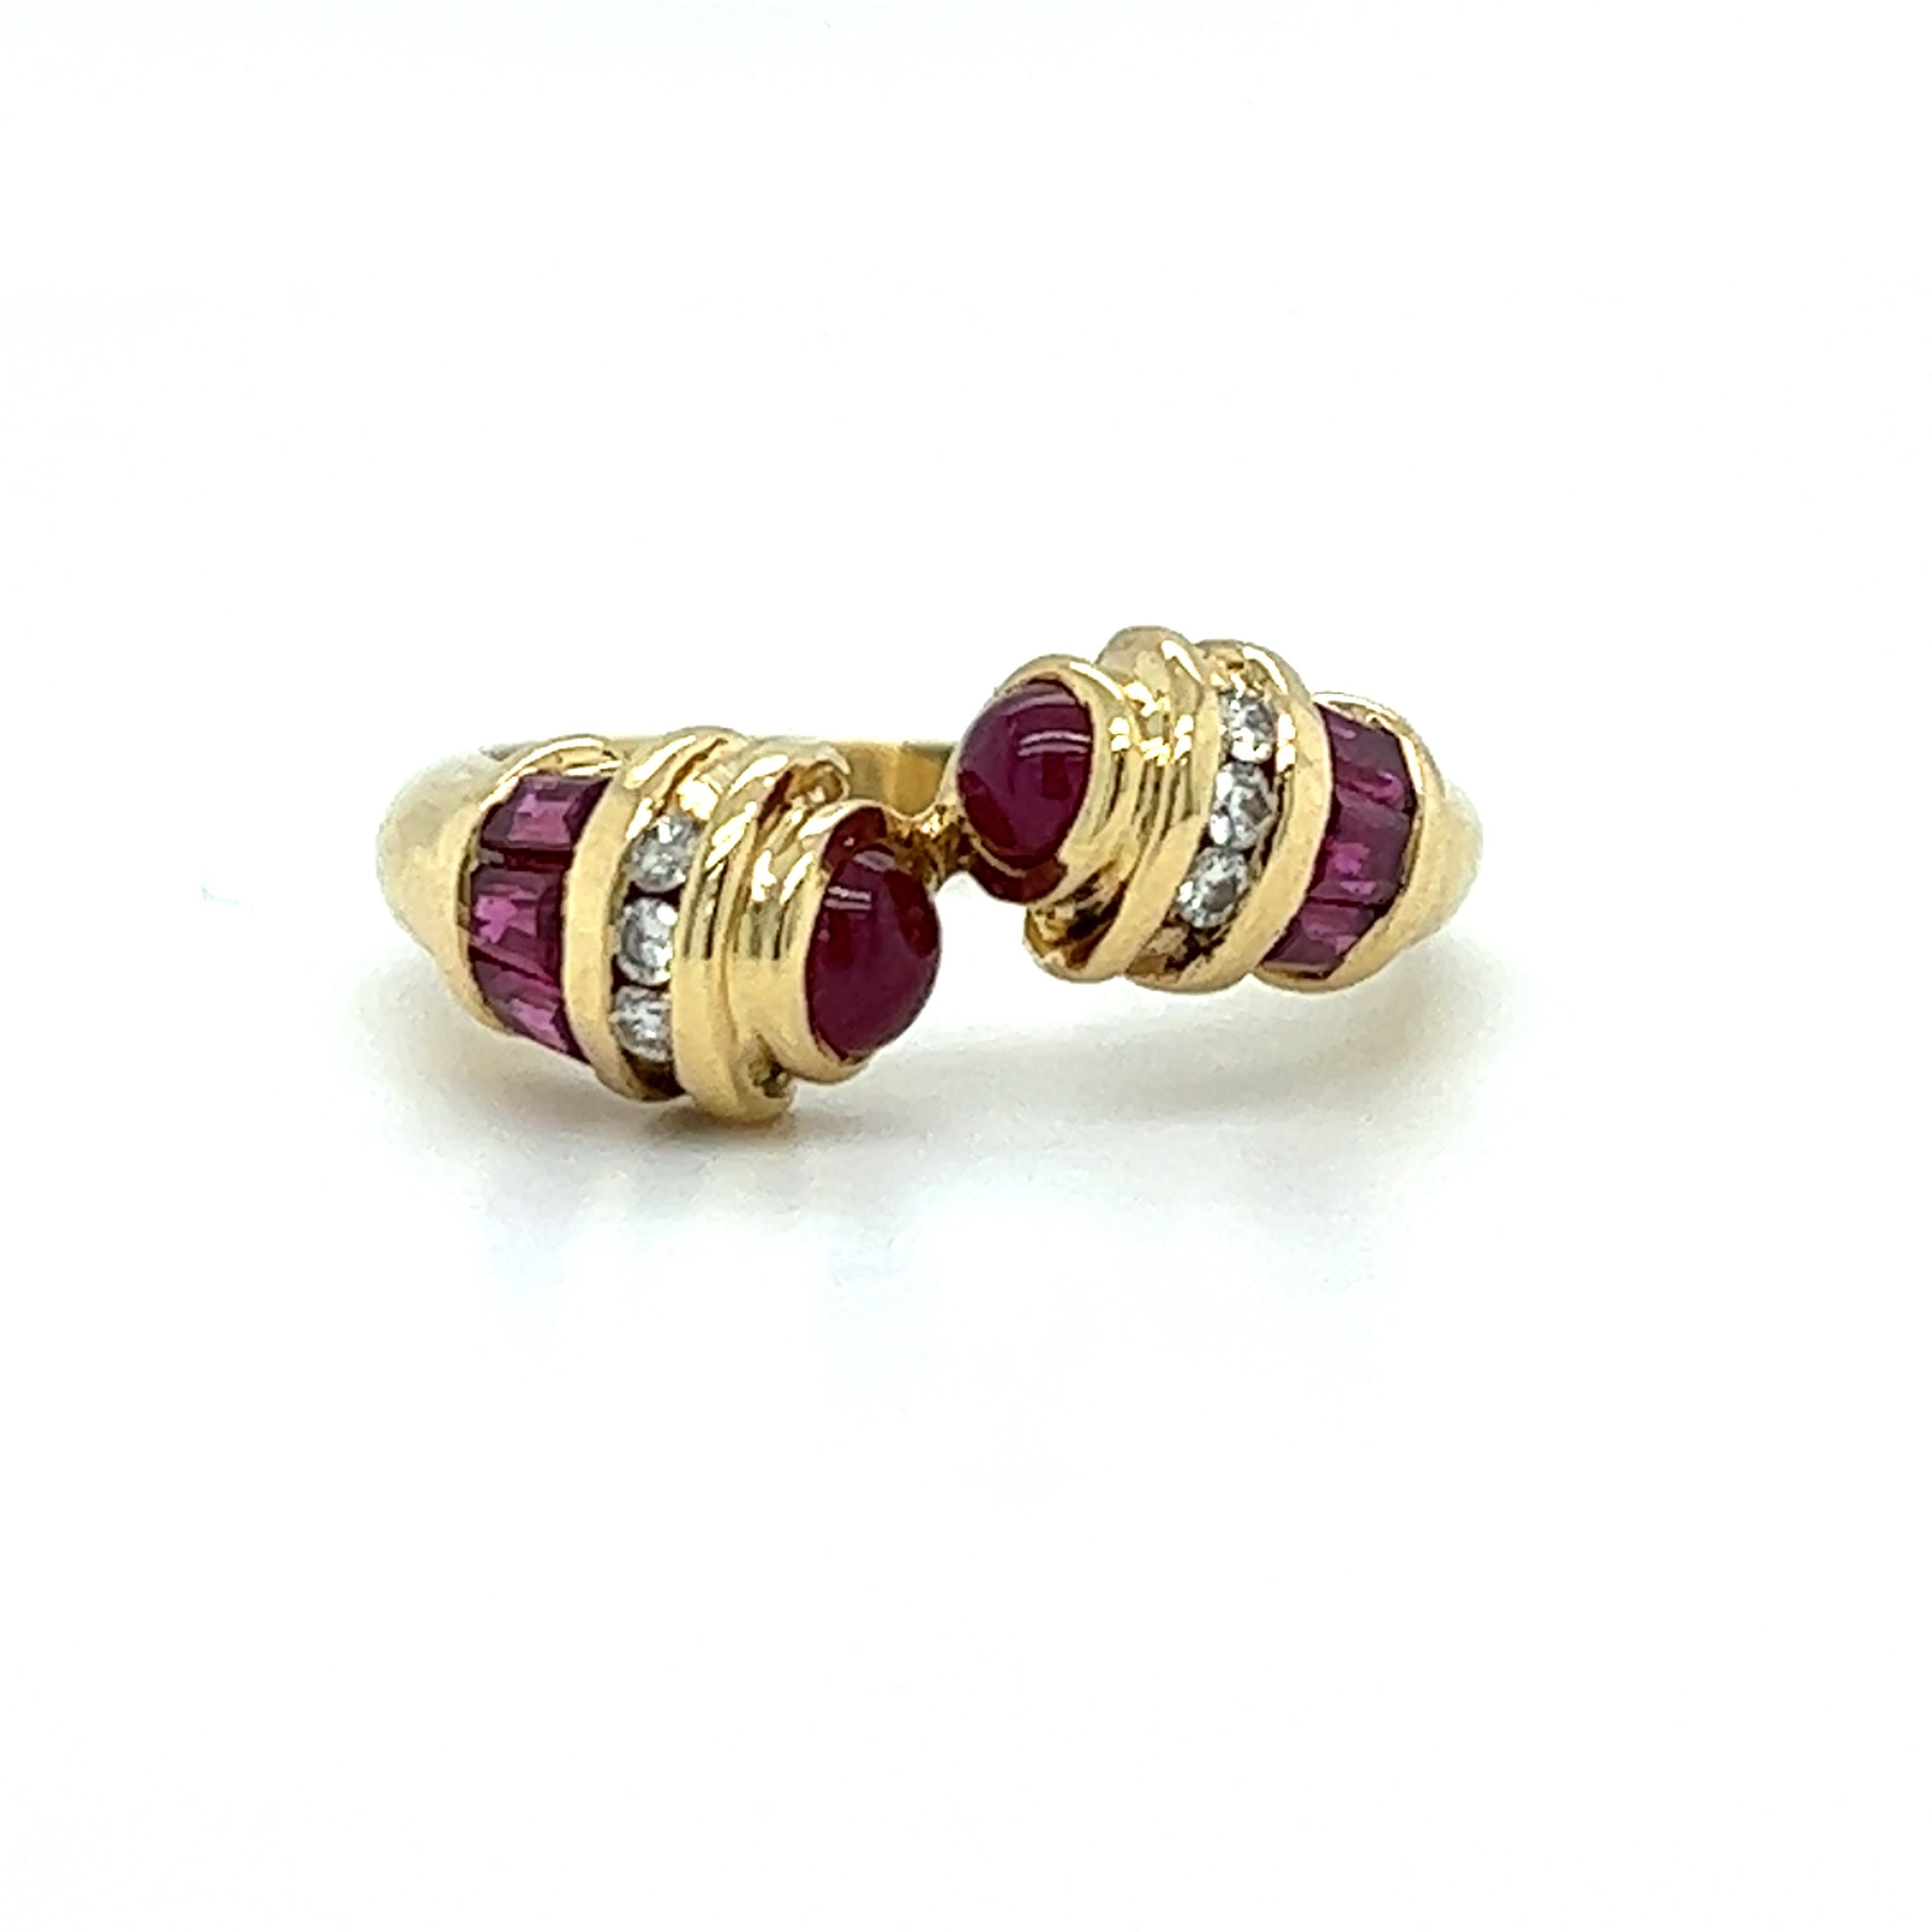 One 18 karat yellow gold bypass ring designed by LeVian, set with two (2) 3.5mm round cabochon natural rubies, six (6) 3x2mm natural baguette rubies and six (6) round brilliant cut diamonds, approximately .12 carat total weight with matching G/H